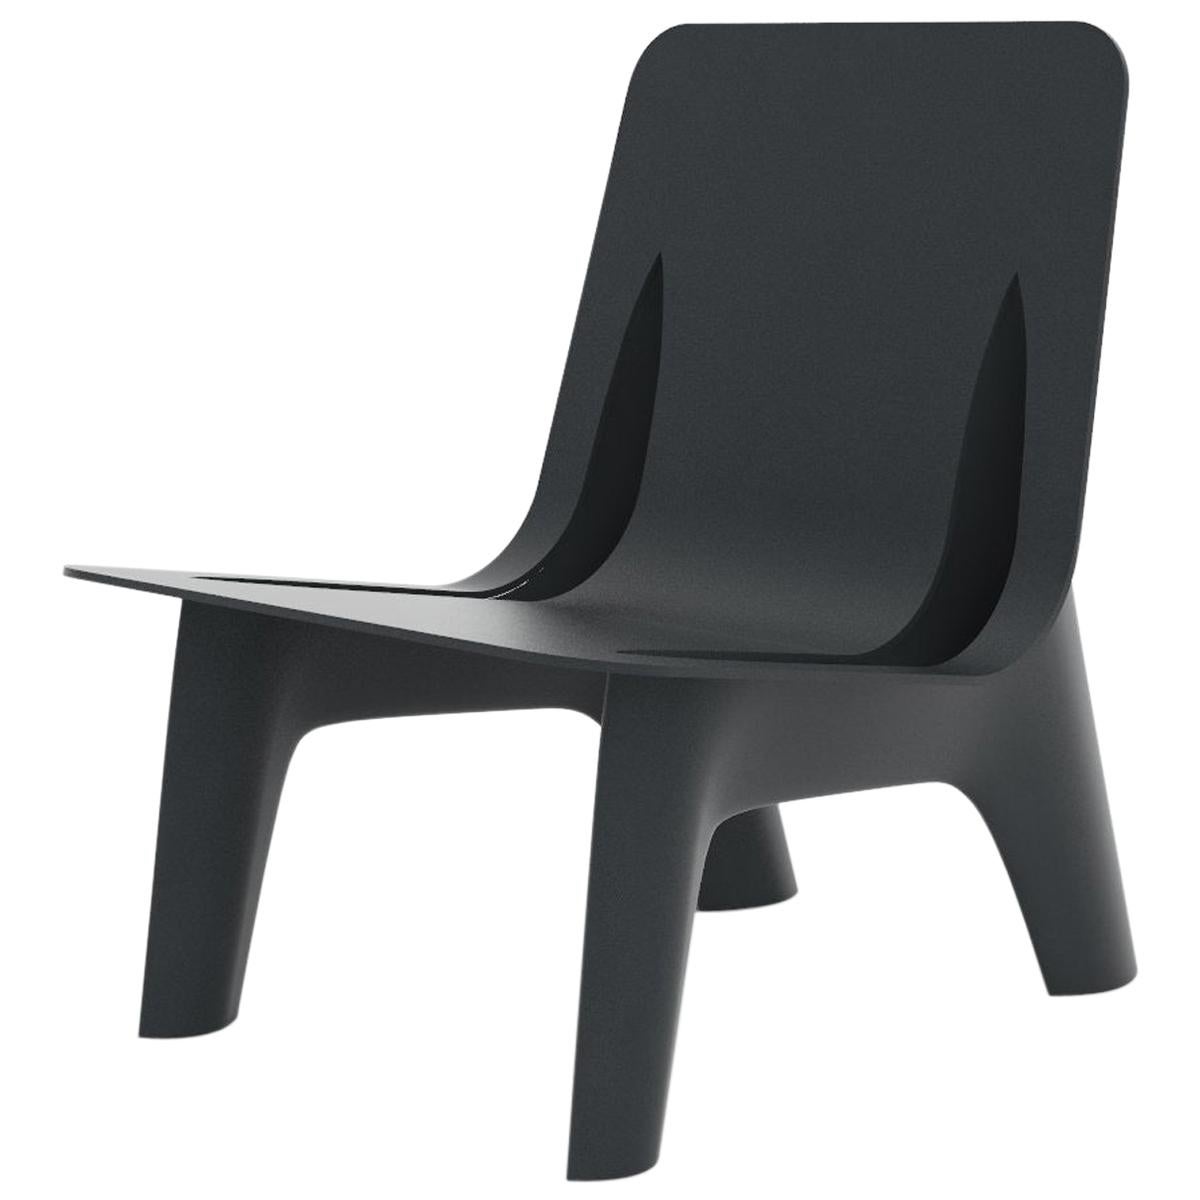 J-Chair Lounge Polished Graphite Grey Color Carbon Steel Seating by Zieta